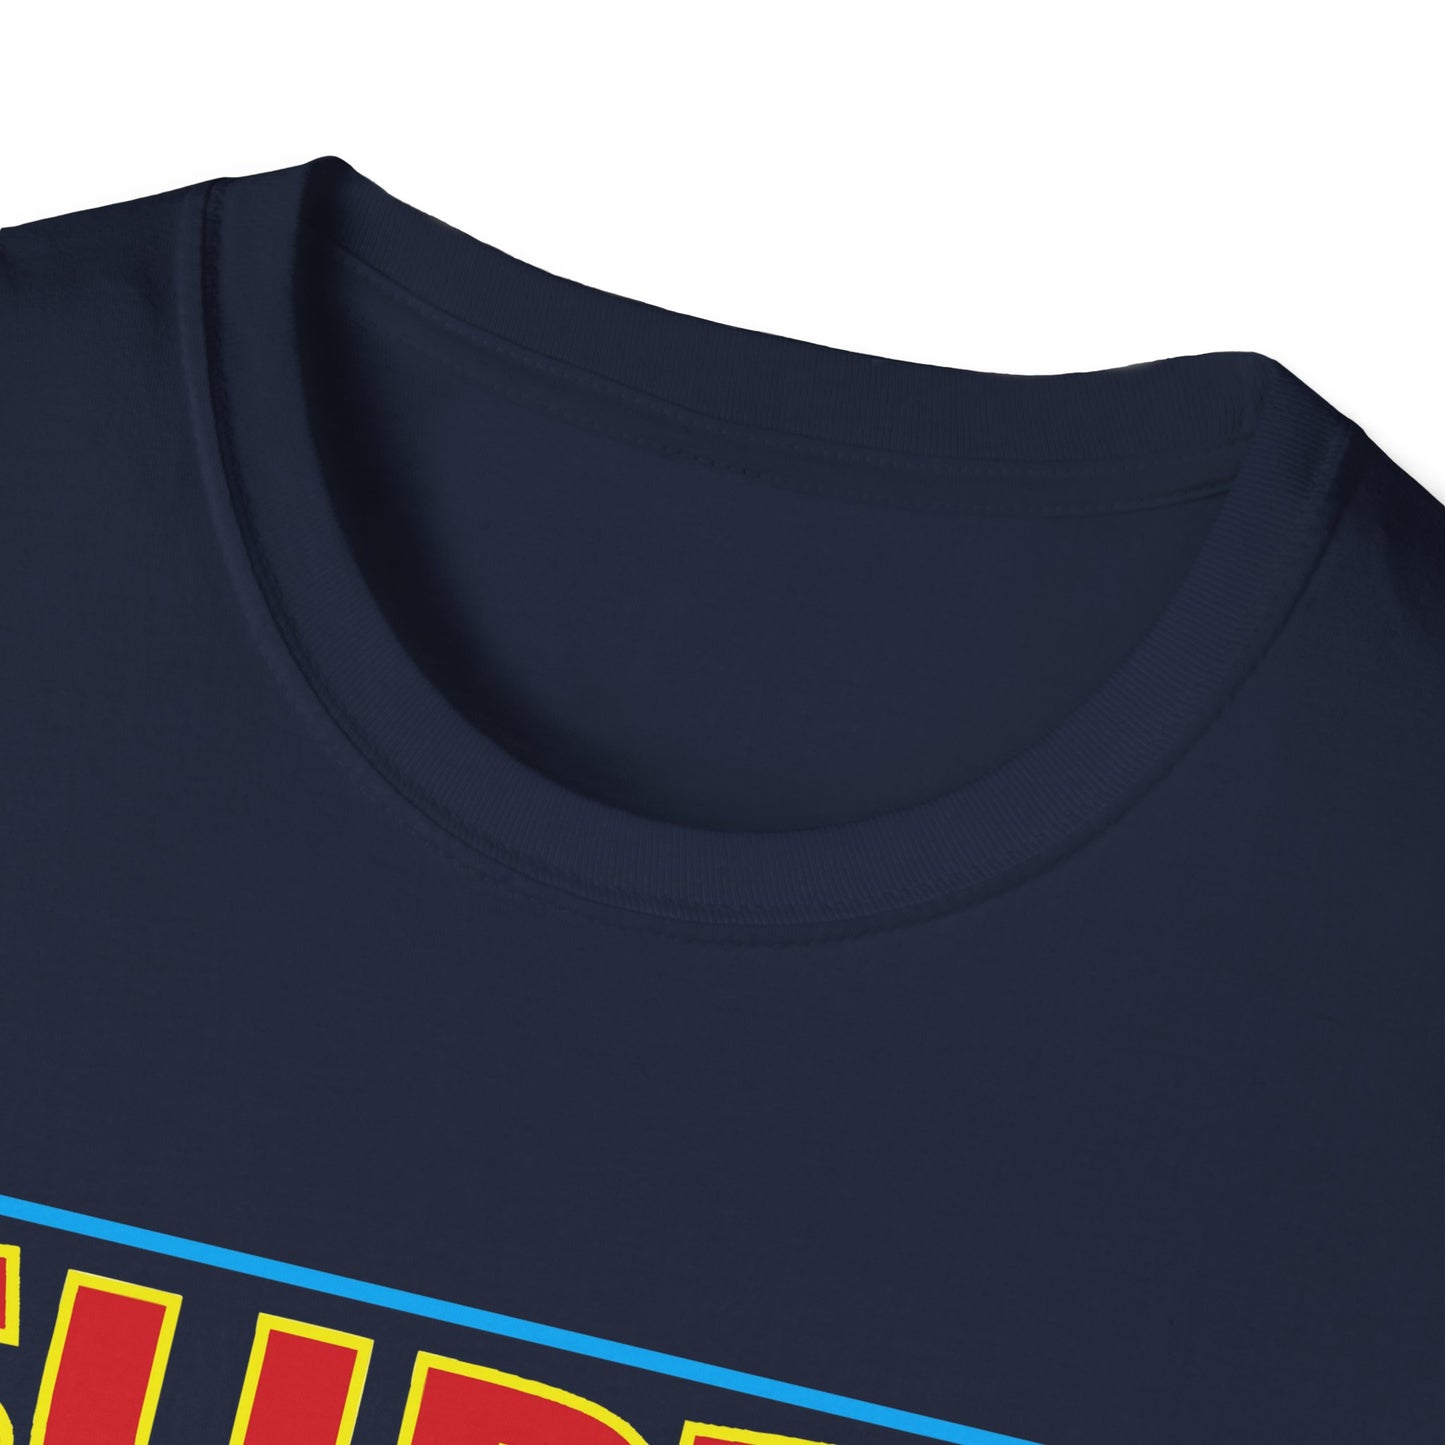 Close-up of a navy blue Unisex Softstyle Logo T-Shirt neckline with a portion of a yellow and red "PRIDE Toronto" graphic visible on the chest. The fabric texture is smooth, and the neckline is neatly stitched.